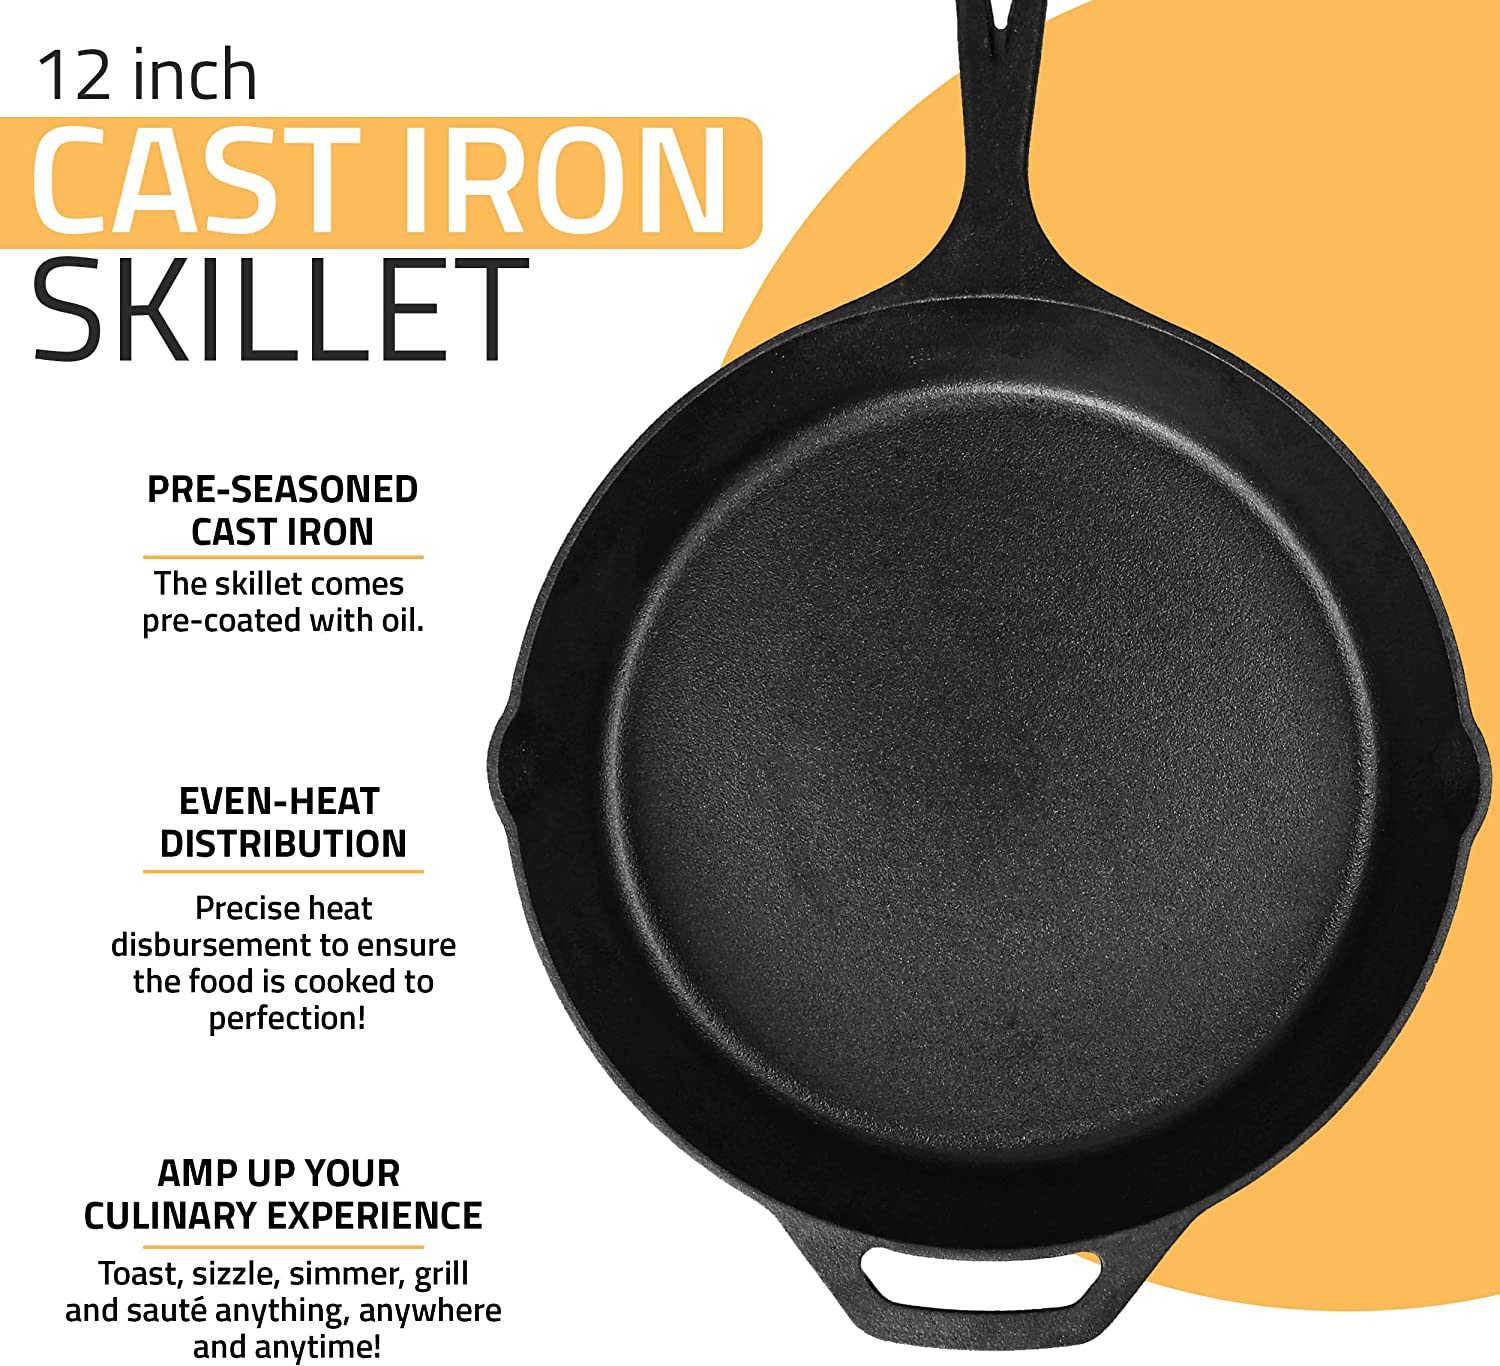 Utopia Kitchen Saute Fry Pan Pre-Seasoned Cast Iron Skillet With Lid - 12  inch Nonstick Frying Pan - Cast Iron Pan - Safe Grill Cookware for indoor 